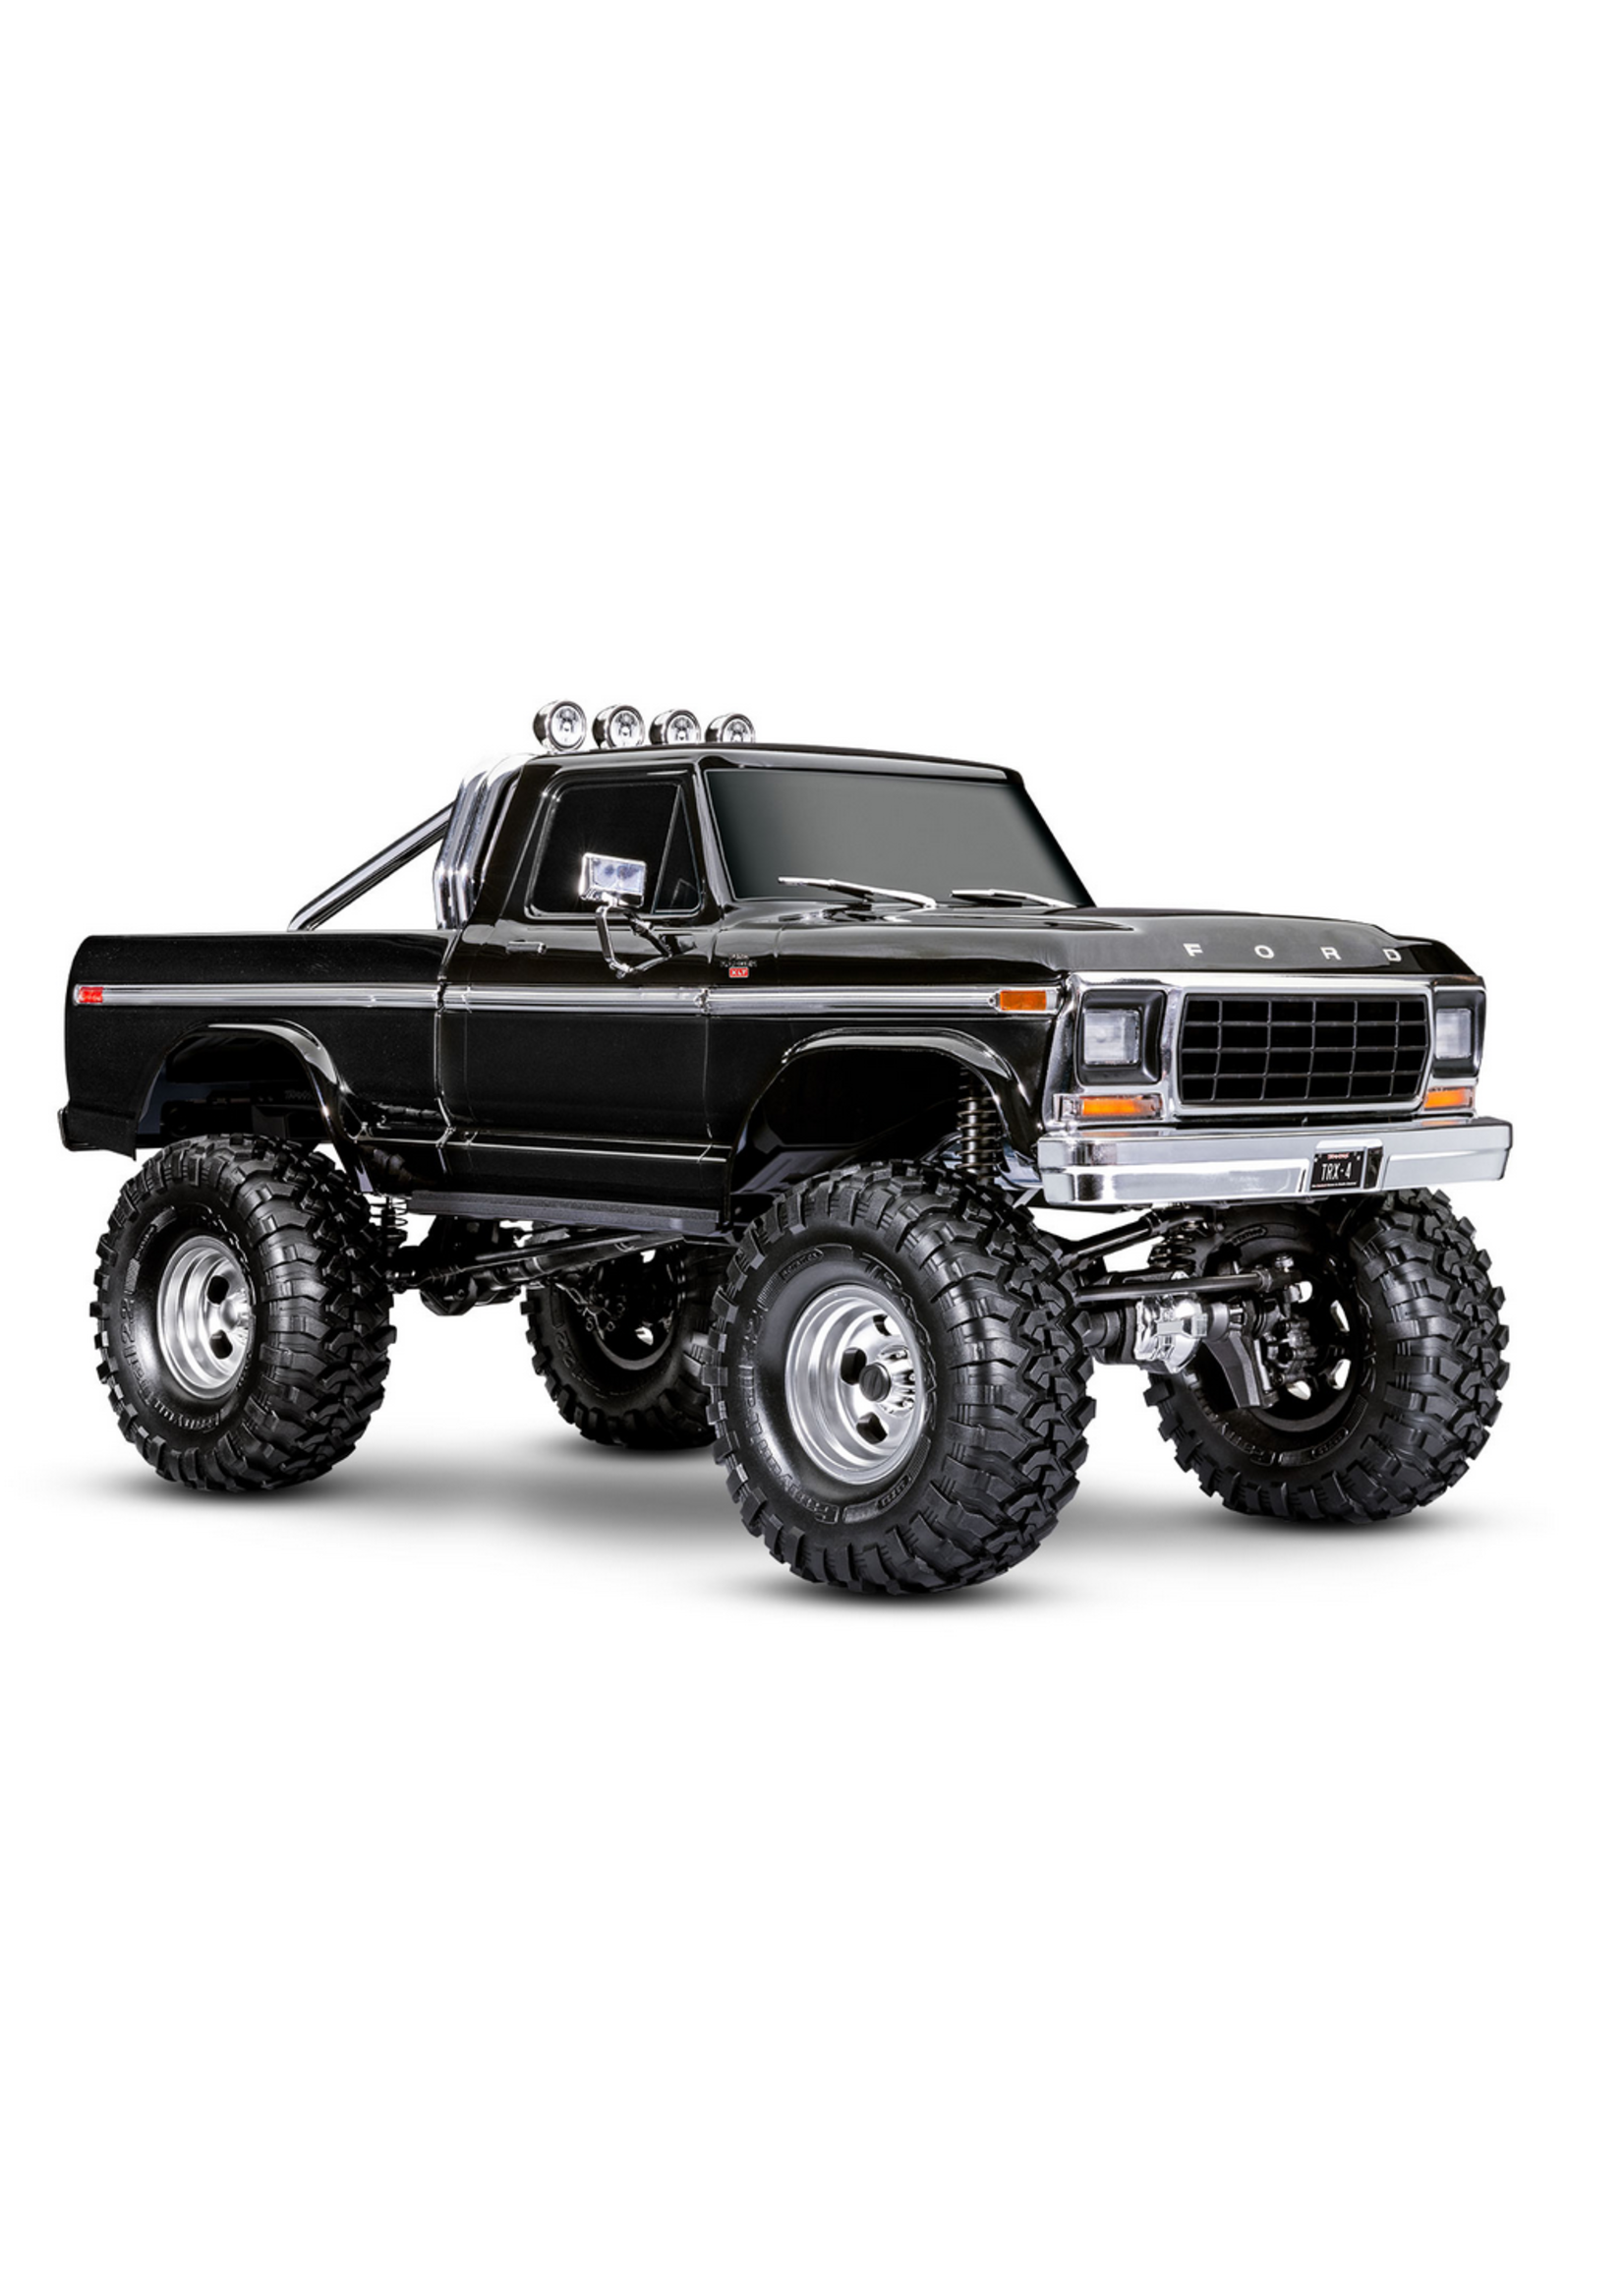 Traxxas TRA92046-4 Traxxas Scale and Trail crawler with 1979 Ford  F-150 Ranger XLT body and Long Arm Lift Kit: 1/10 scale 4WD electric truck